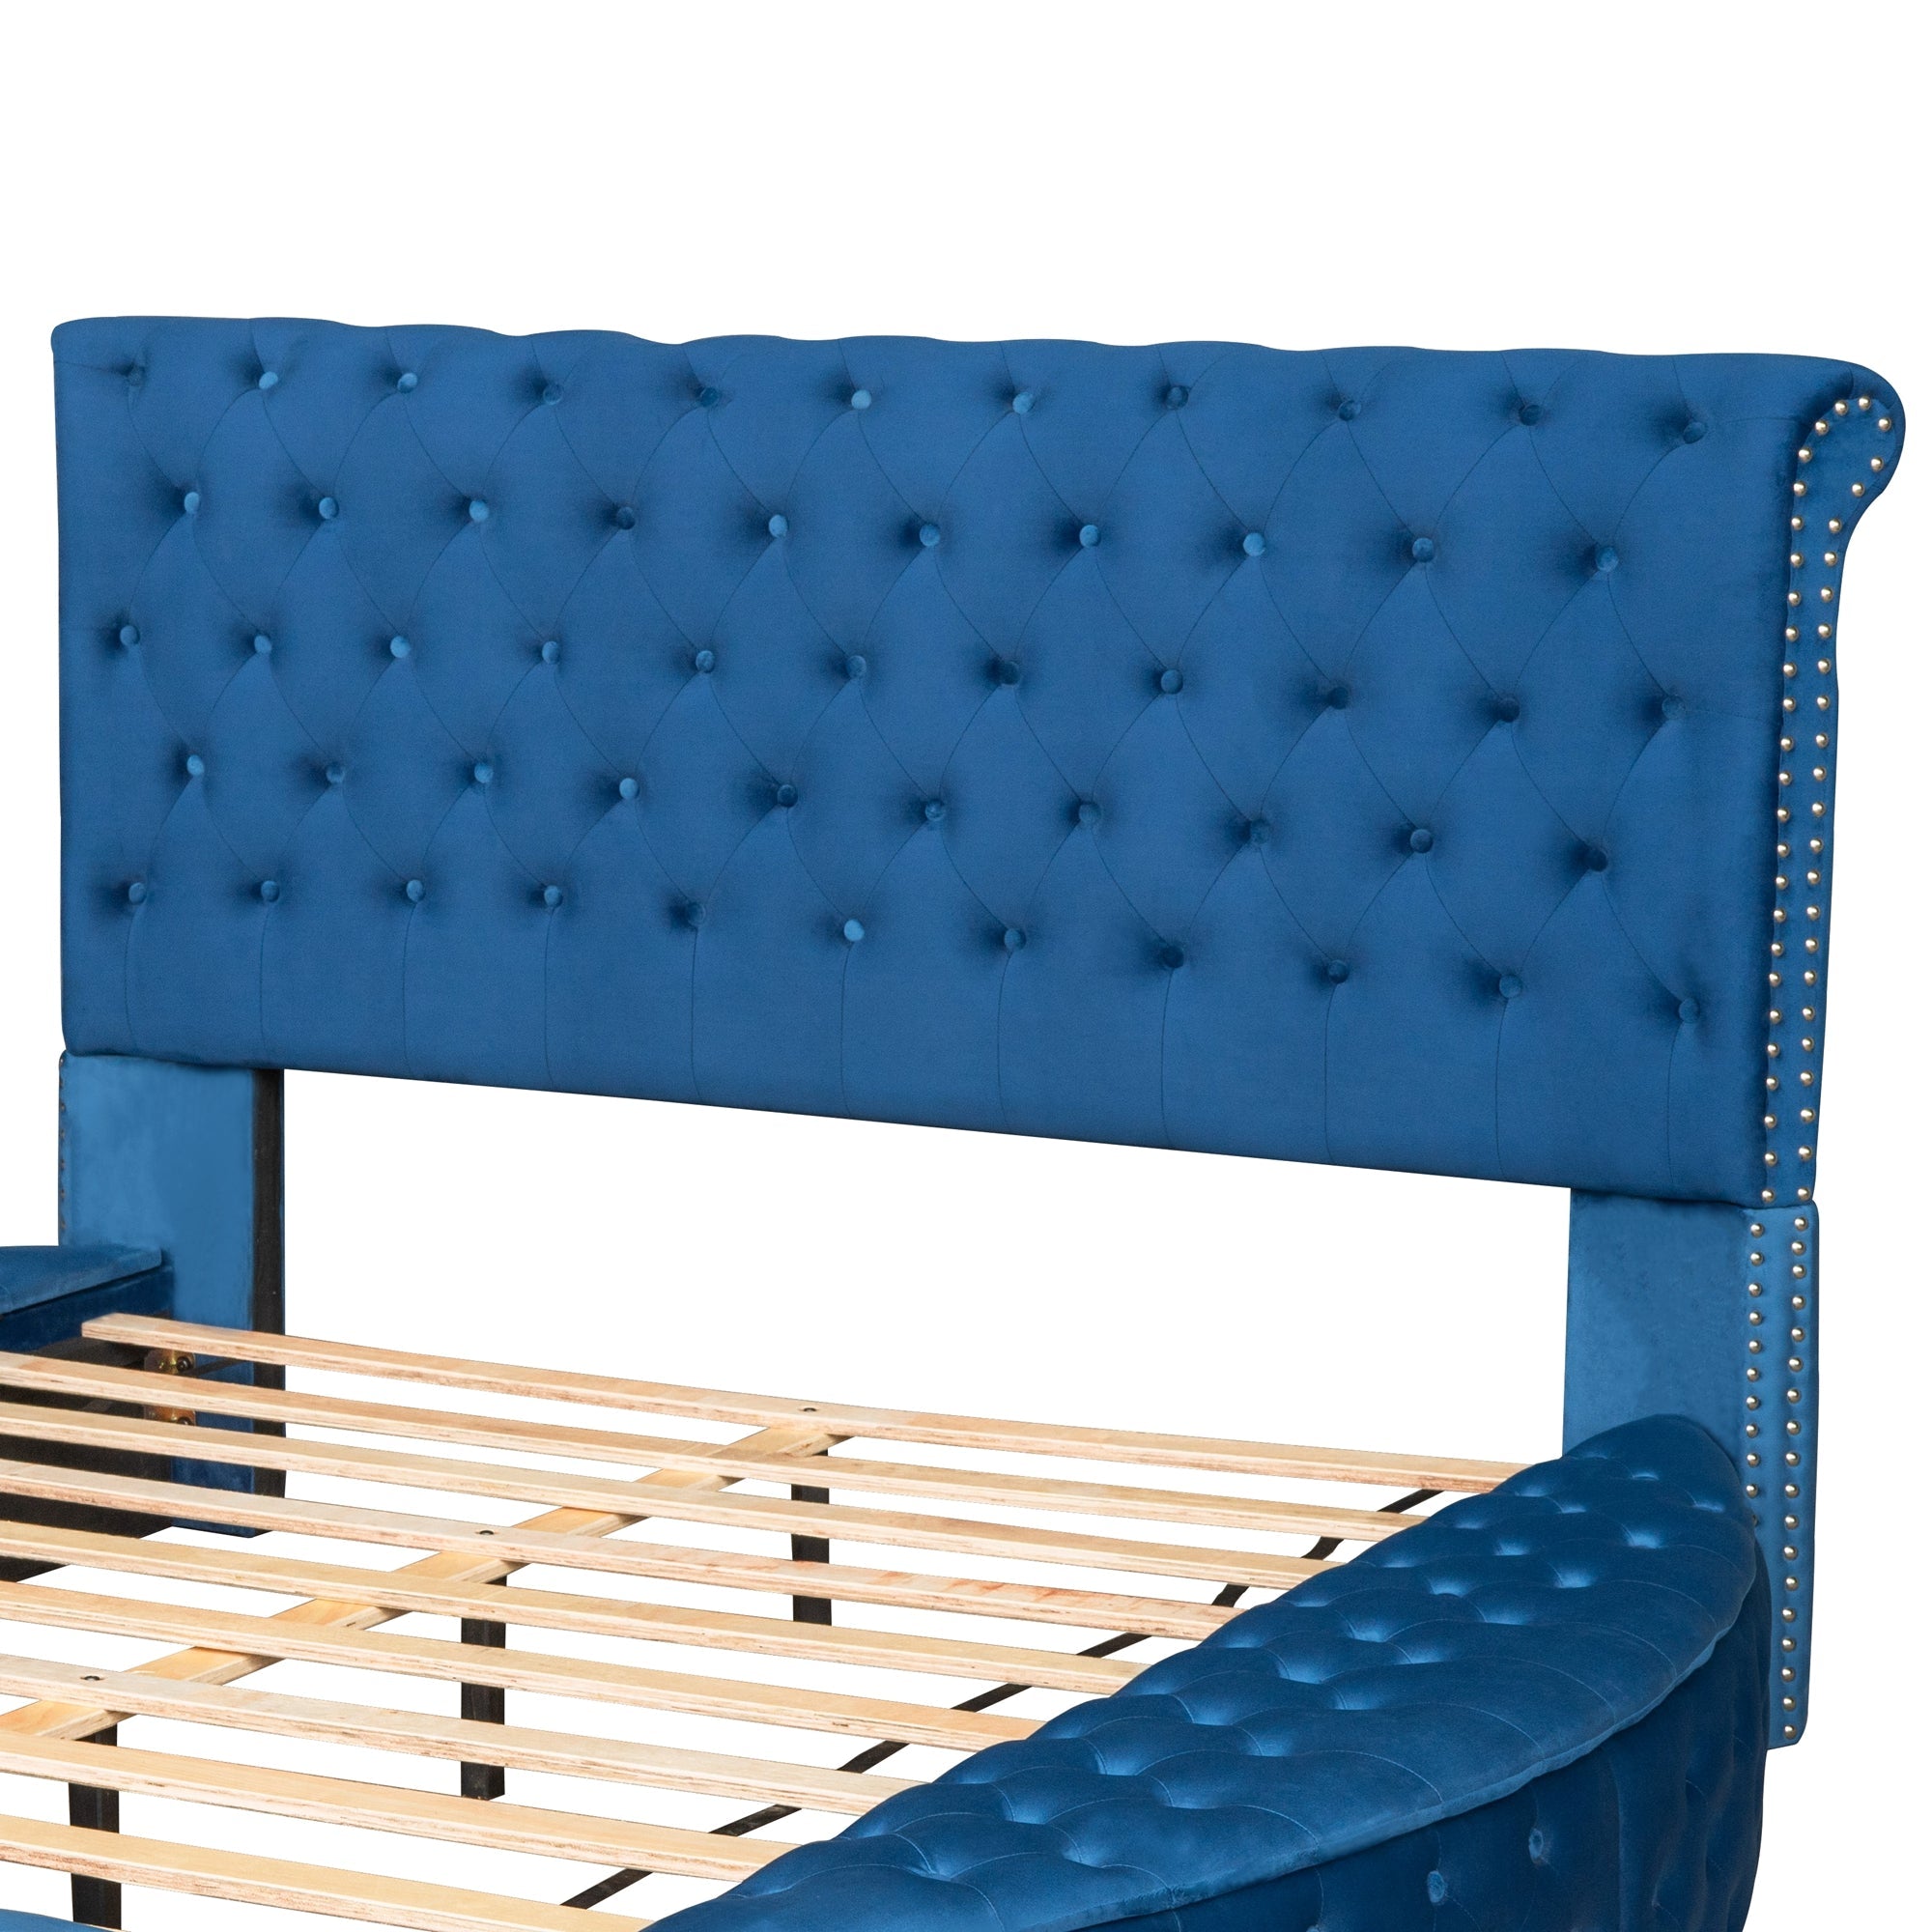 Full Round Upholstery Kids Platform Bed with Storage on Both Sides , Blue